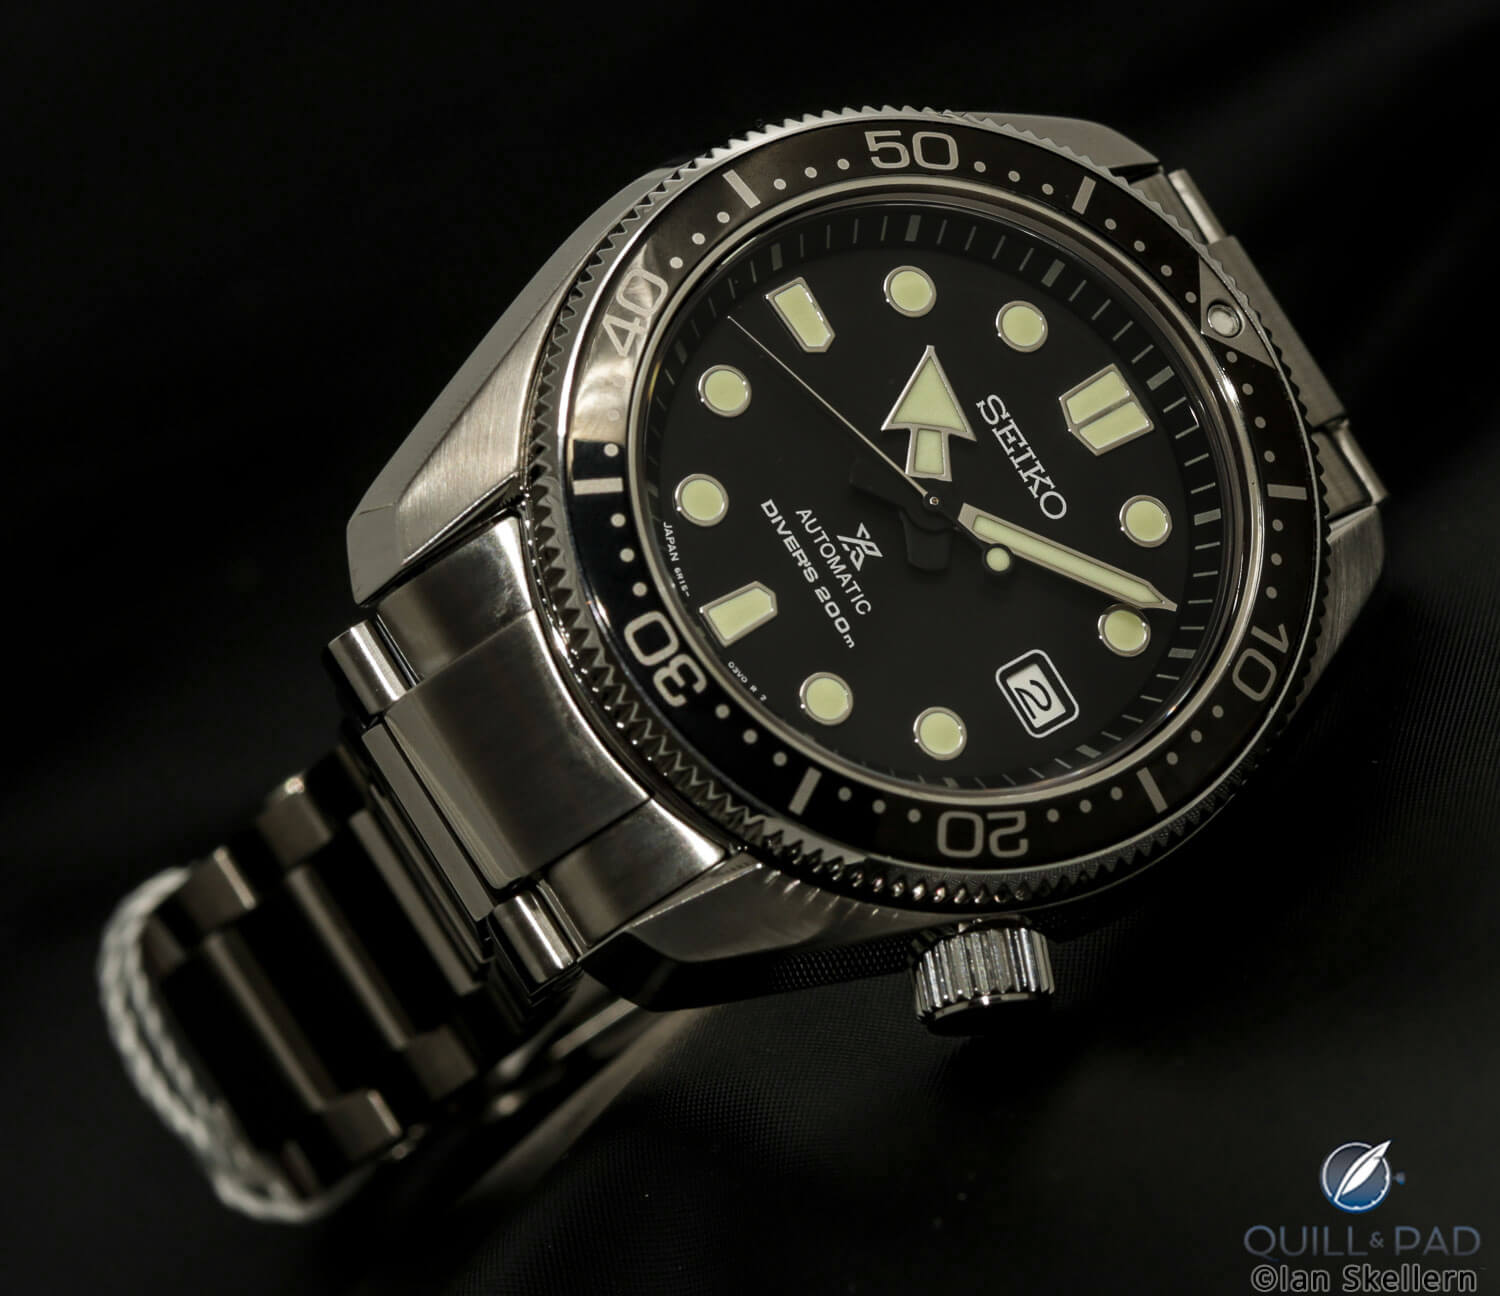 Five Vintage-Style Diver's Watches To “Seas” The Day From Blancpain, Seiko,  Longines, Oris, And Tudor - Quill & Pad